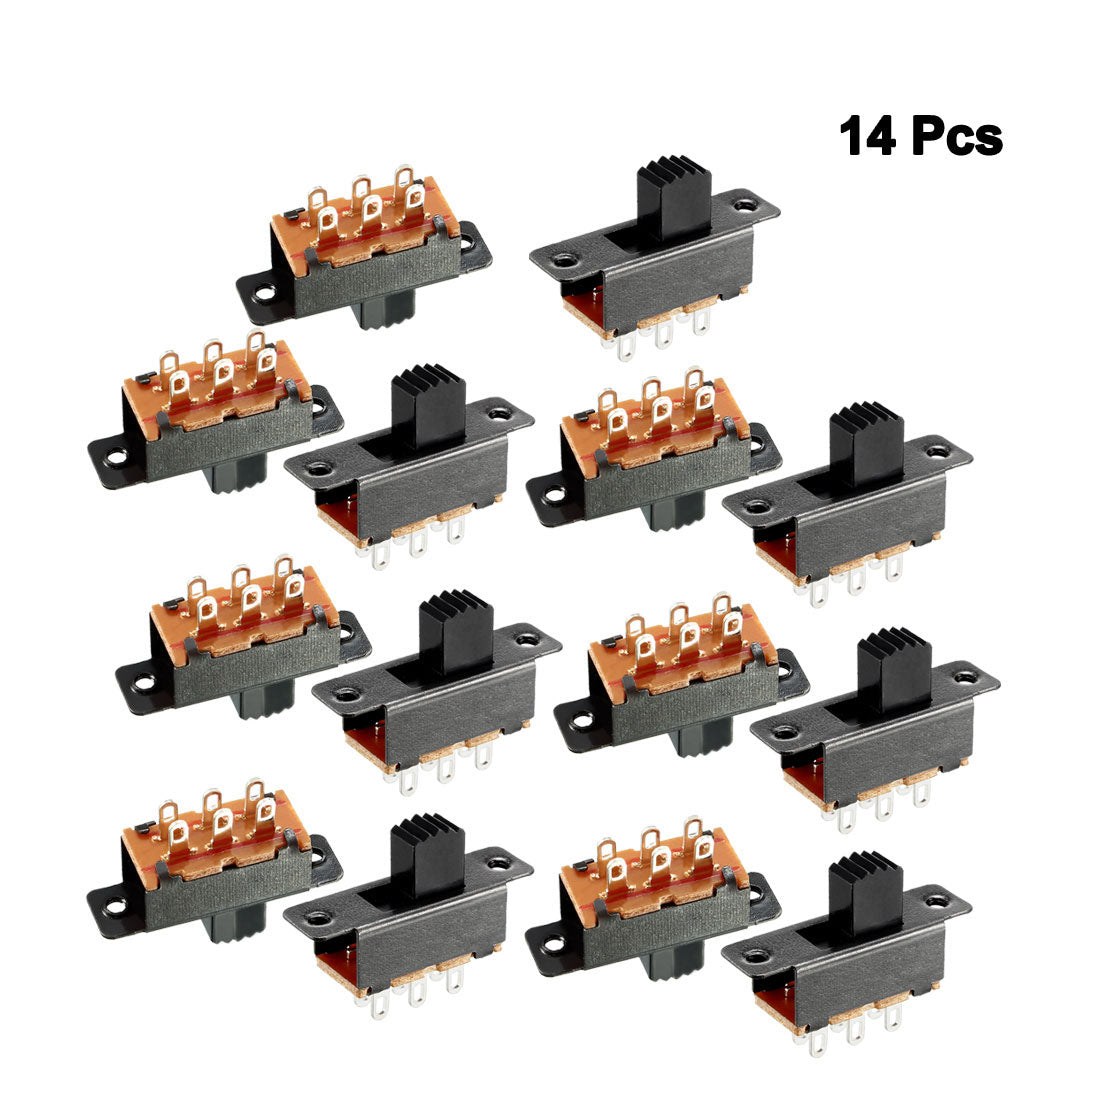 uxcell Uxcell 14Pcs 5mm Vertical Slide Switch DPDT 6 Terminals PCB Panel Latching